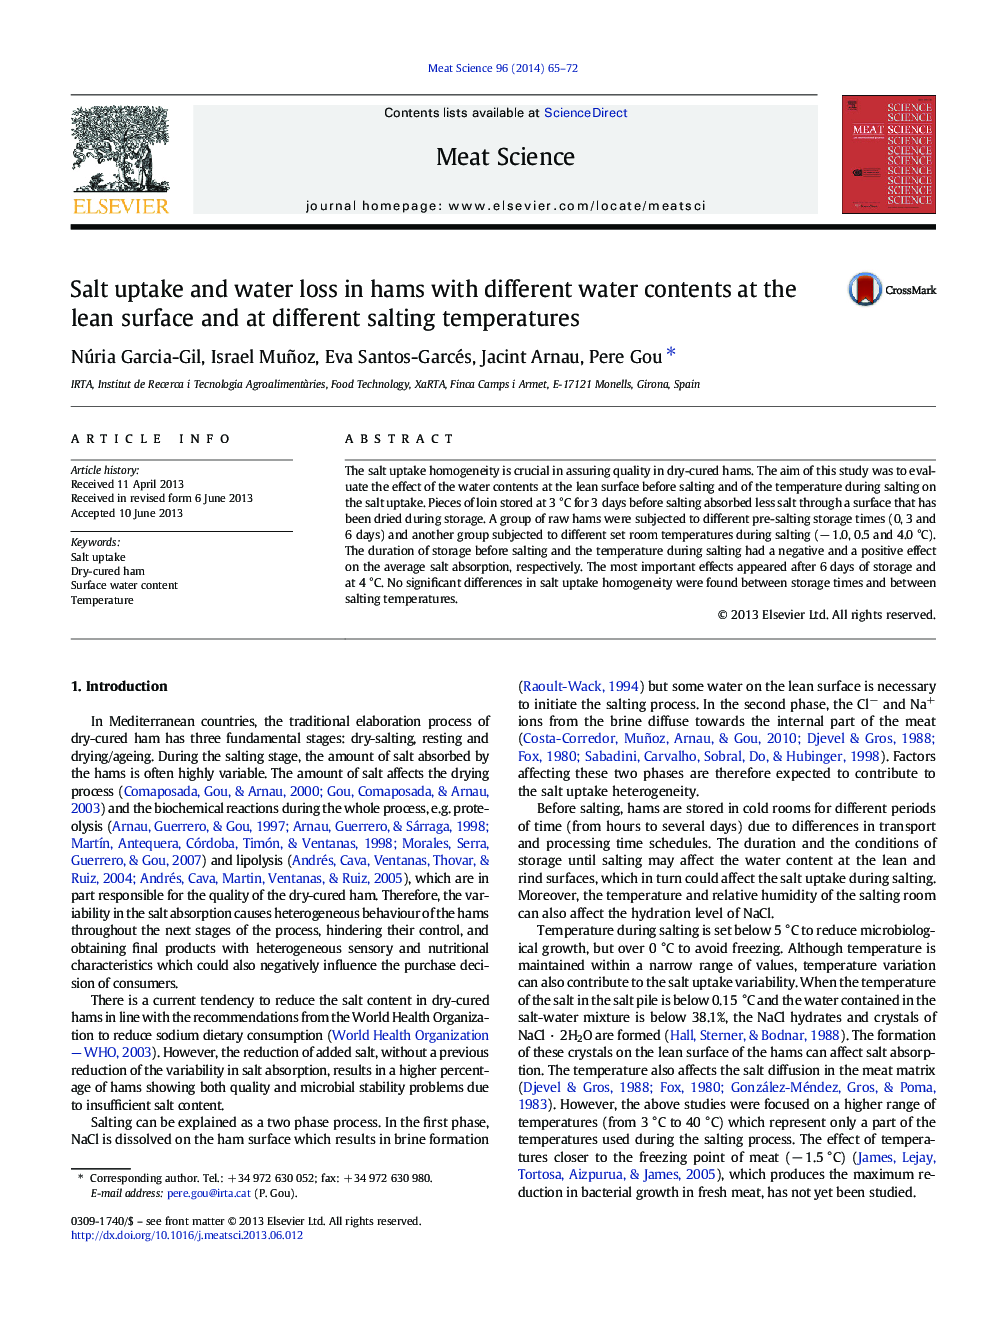 Salt uptake and water loss in hams with different water contents at the lean surface and at different salting temperatures